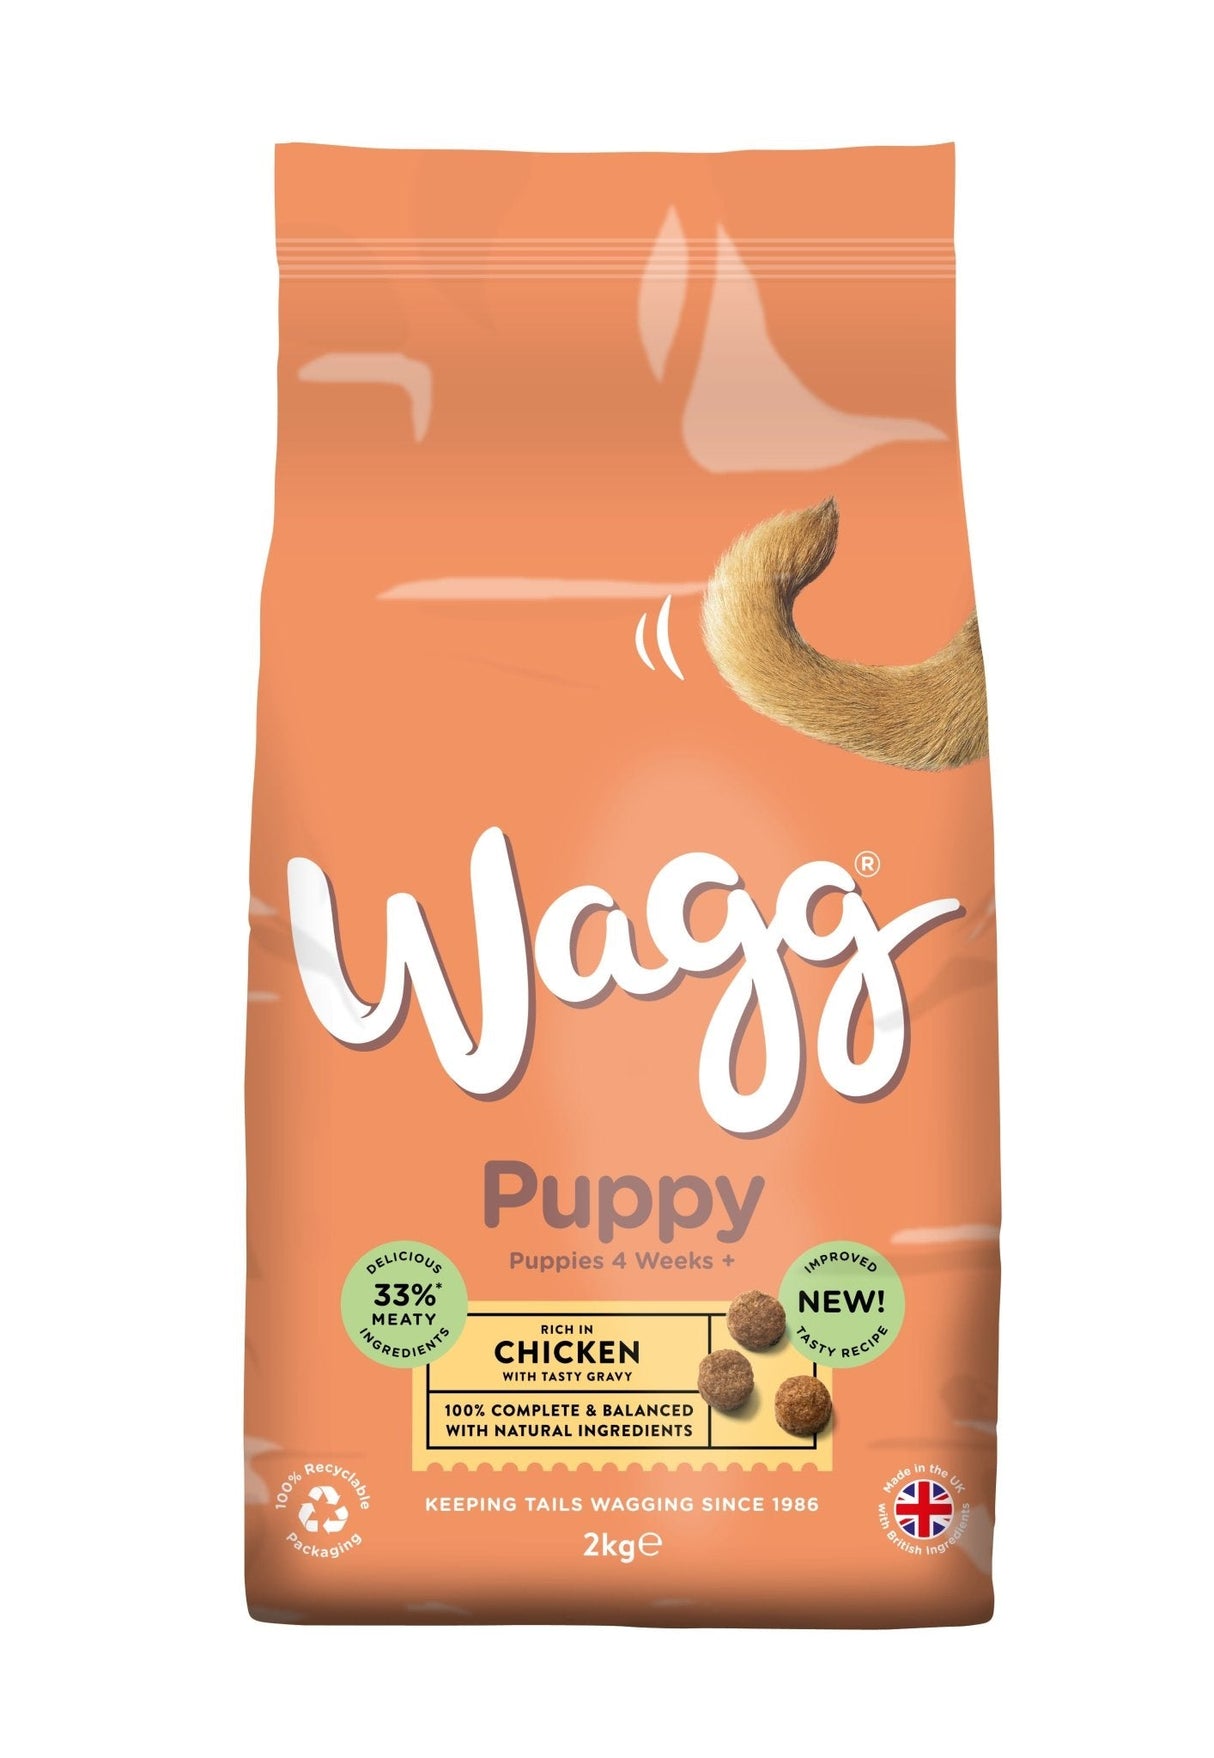 Wagg Puppy Complete, Wagg, 6x2kg